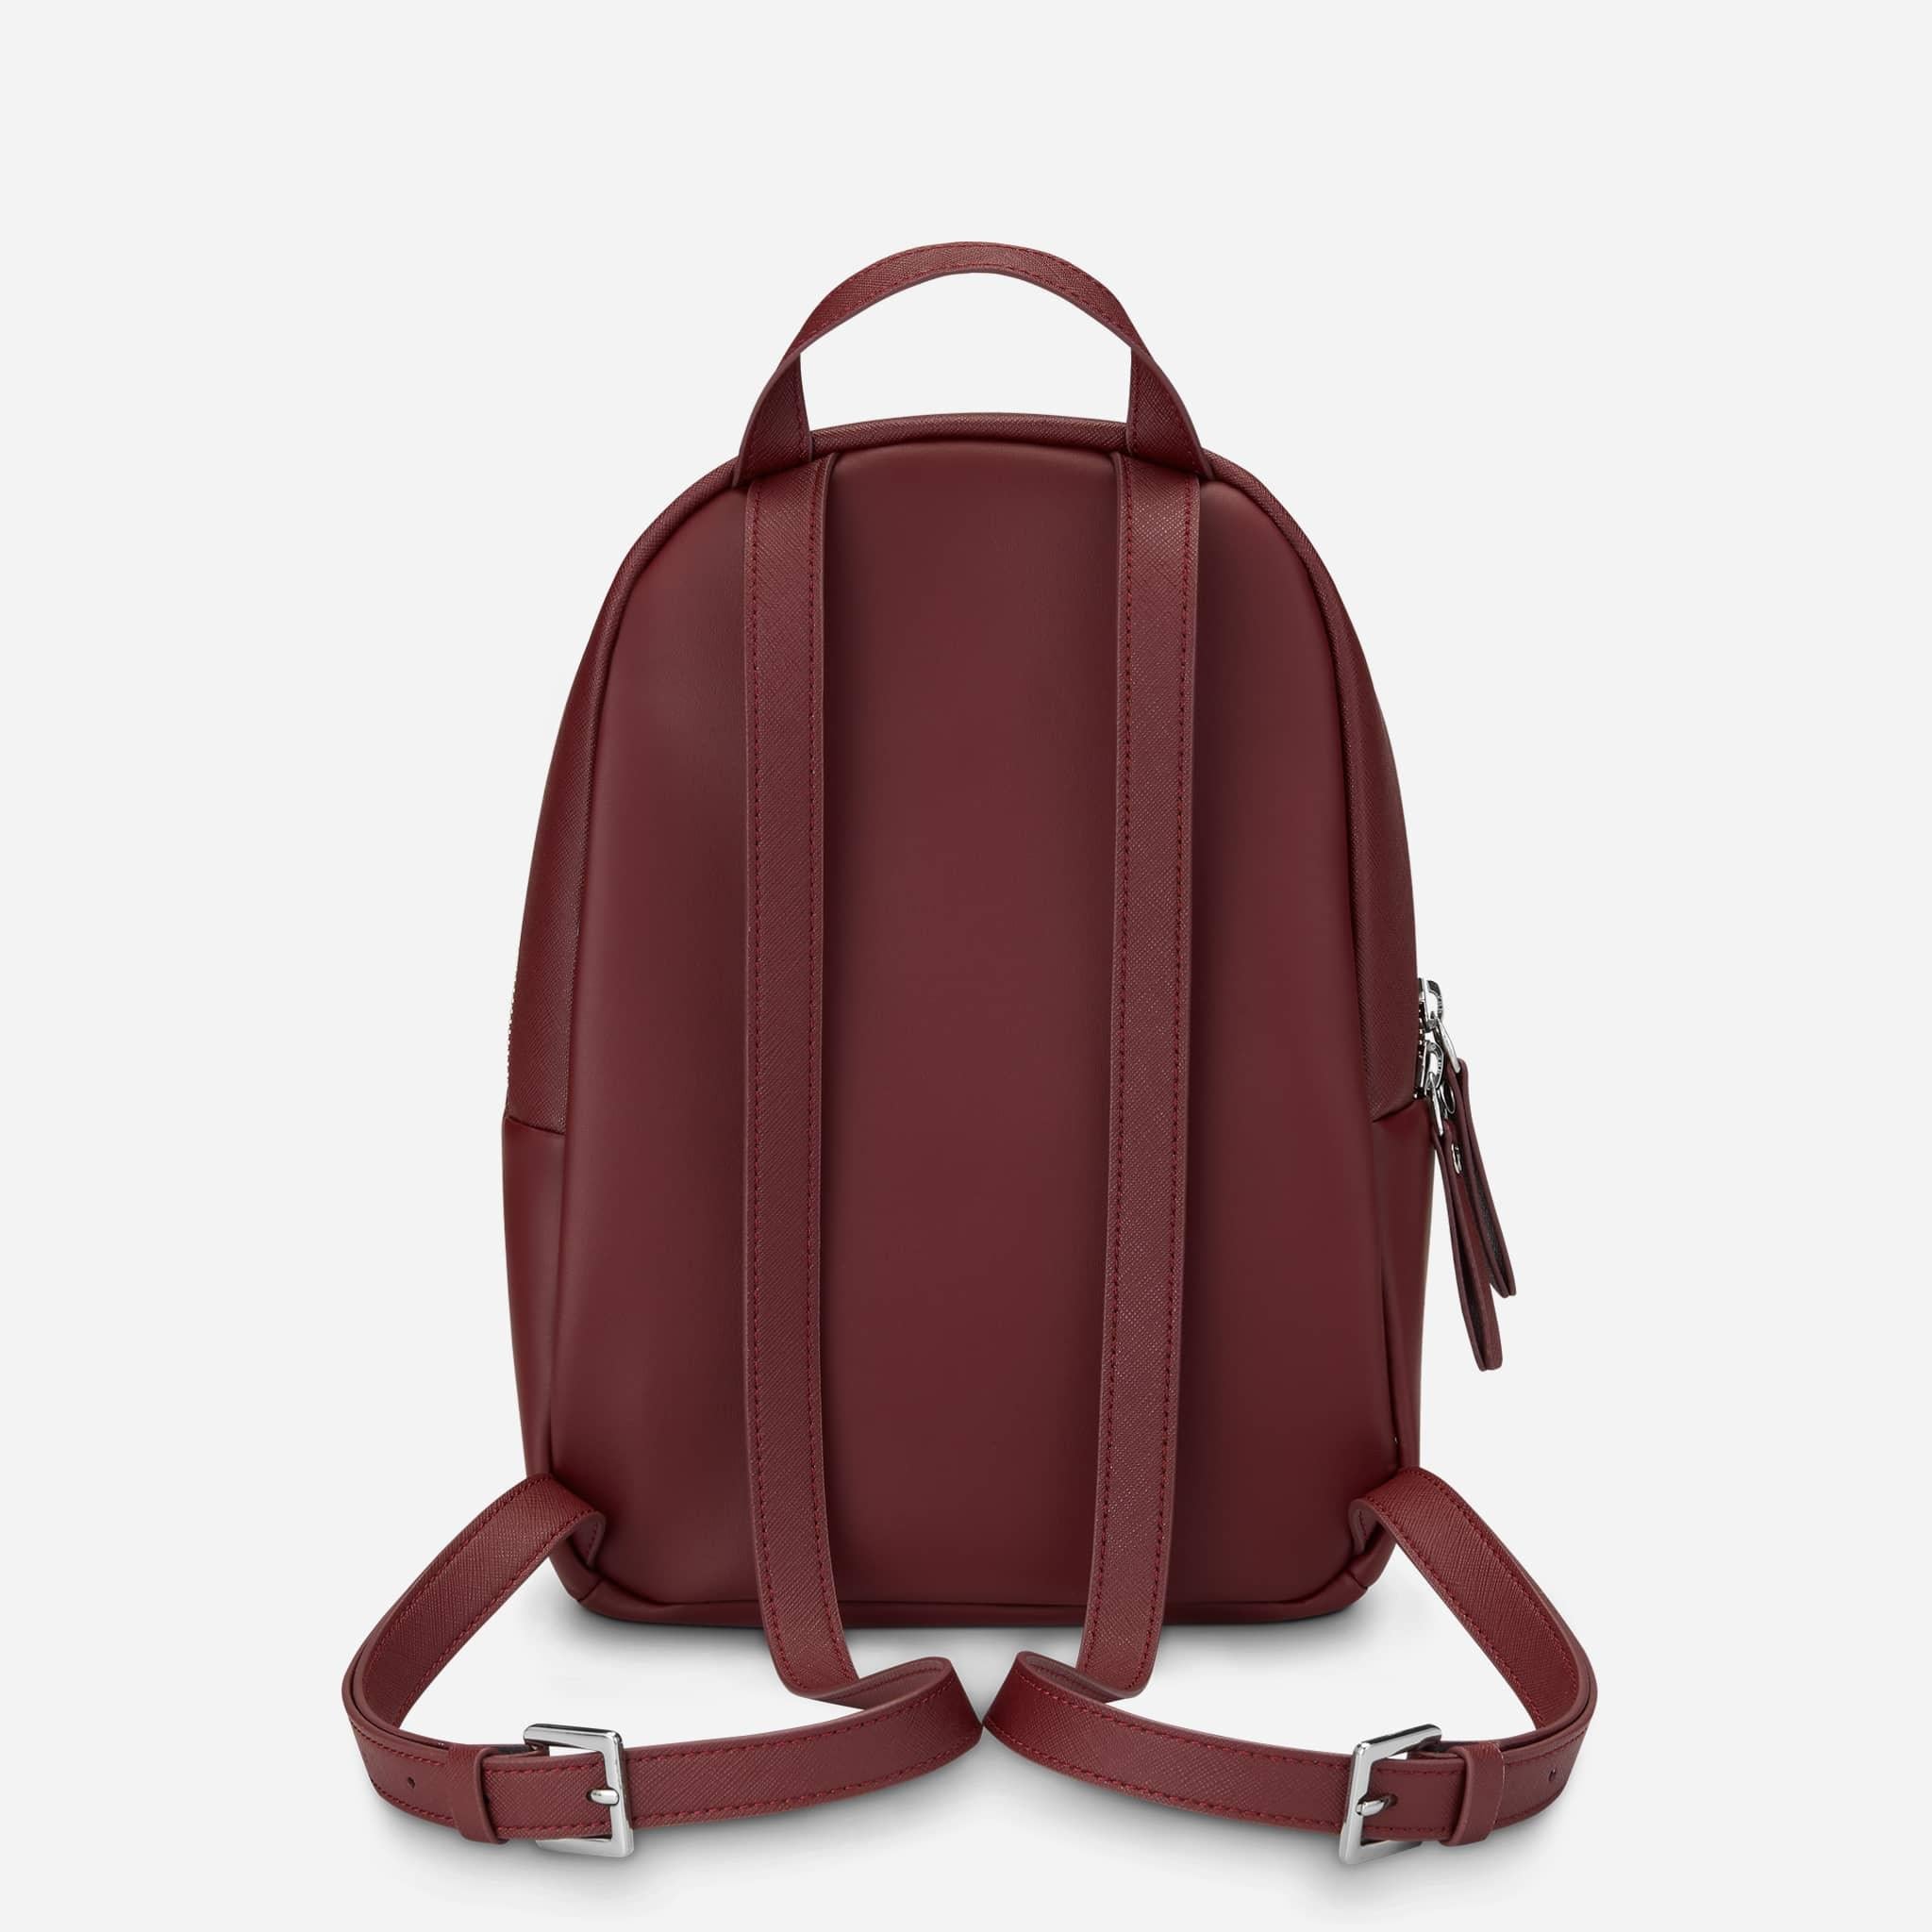 Primary School's Student's Backpack Bags in 2 Color Combine for Popular  Color Way - China Bag and Several Color Is Available price |  Made-in-China.com